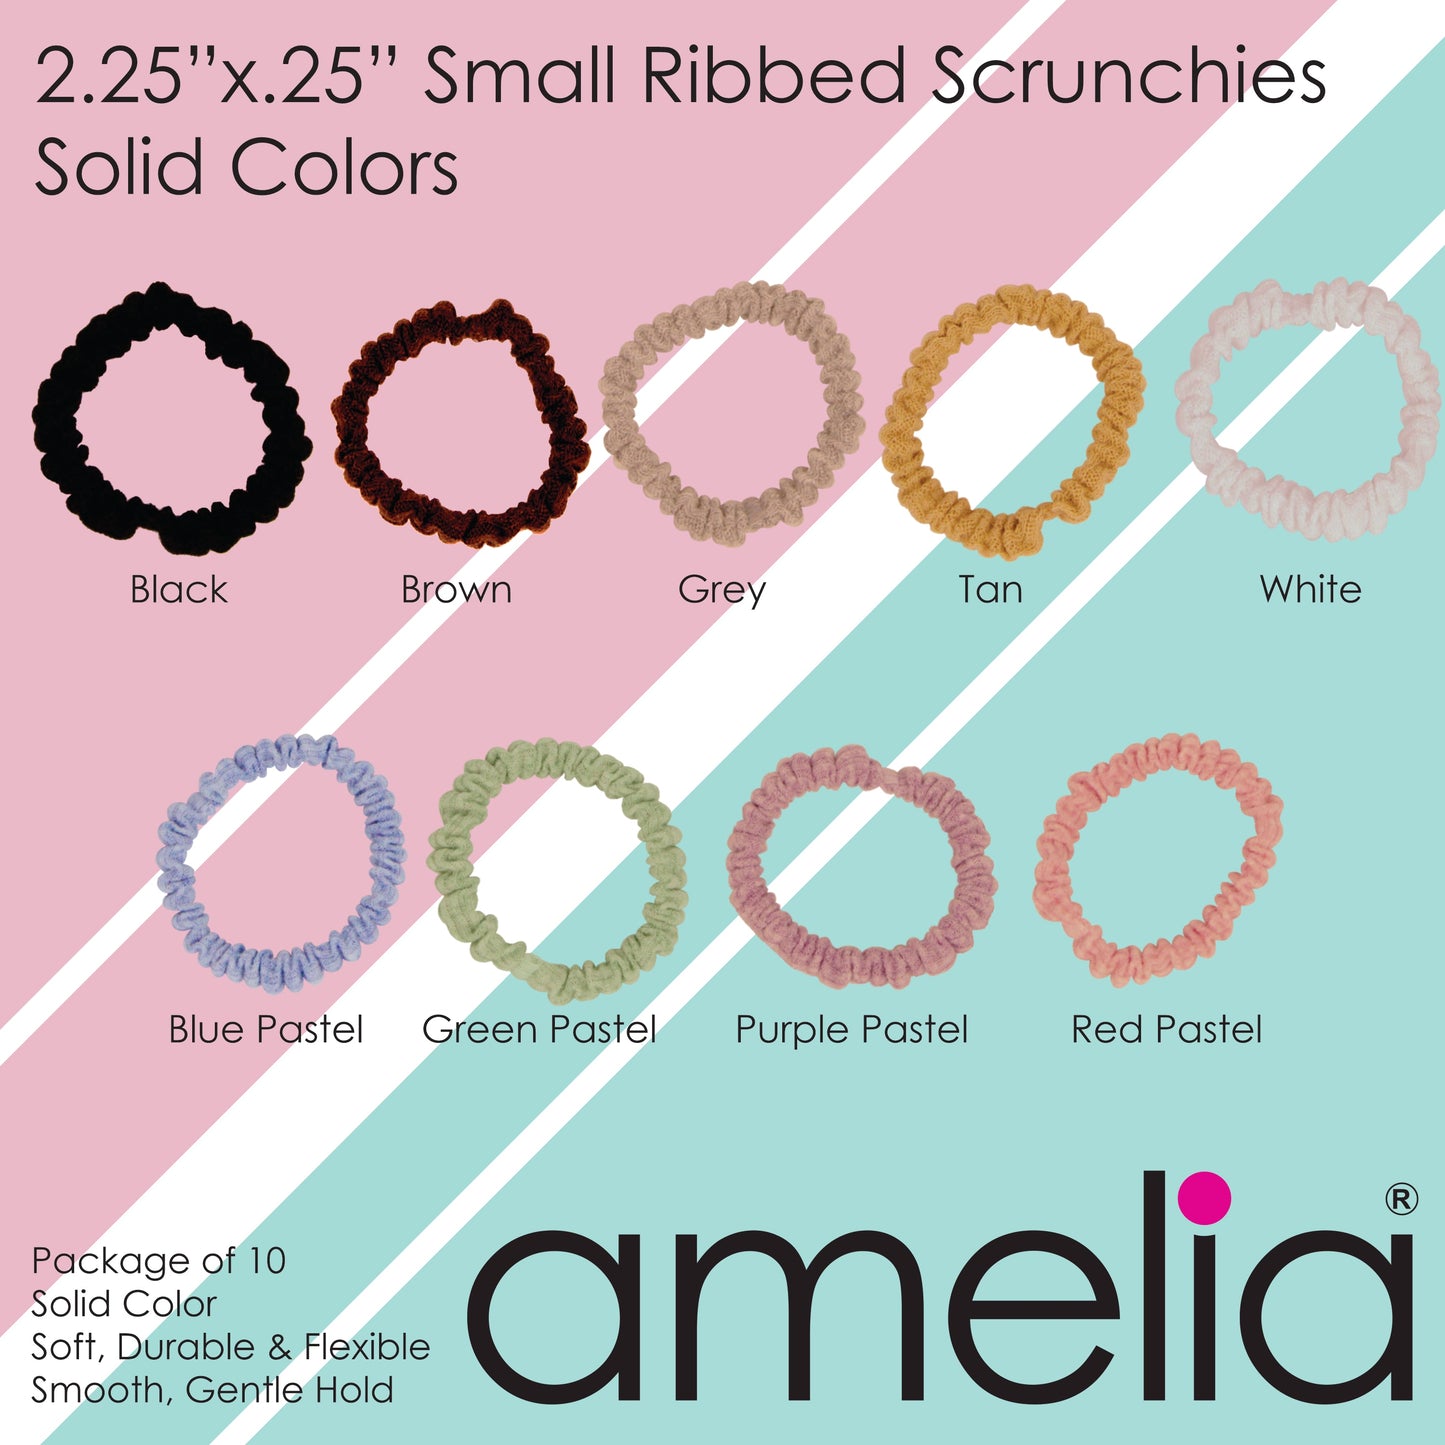 Amelia Beauty, Earth Tone Mix Ribbed Scrunchies, 2.25in Diameter, Gentle on Hair, Strong Hold, No Snag, No Dents or Creases. 10 Pack